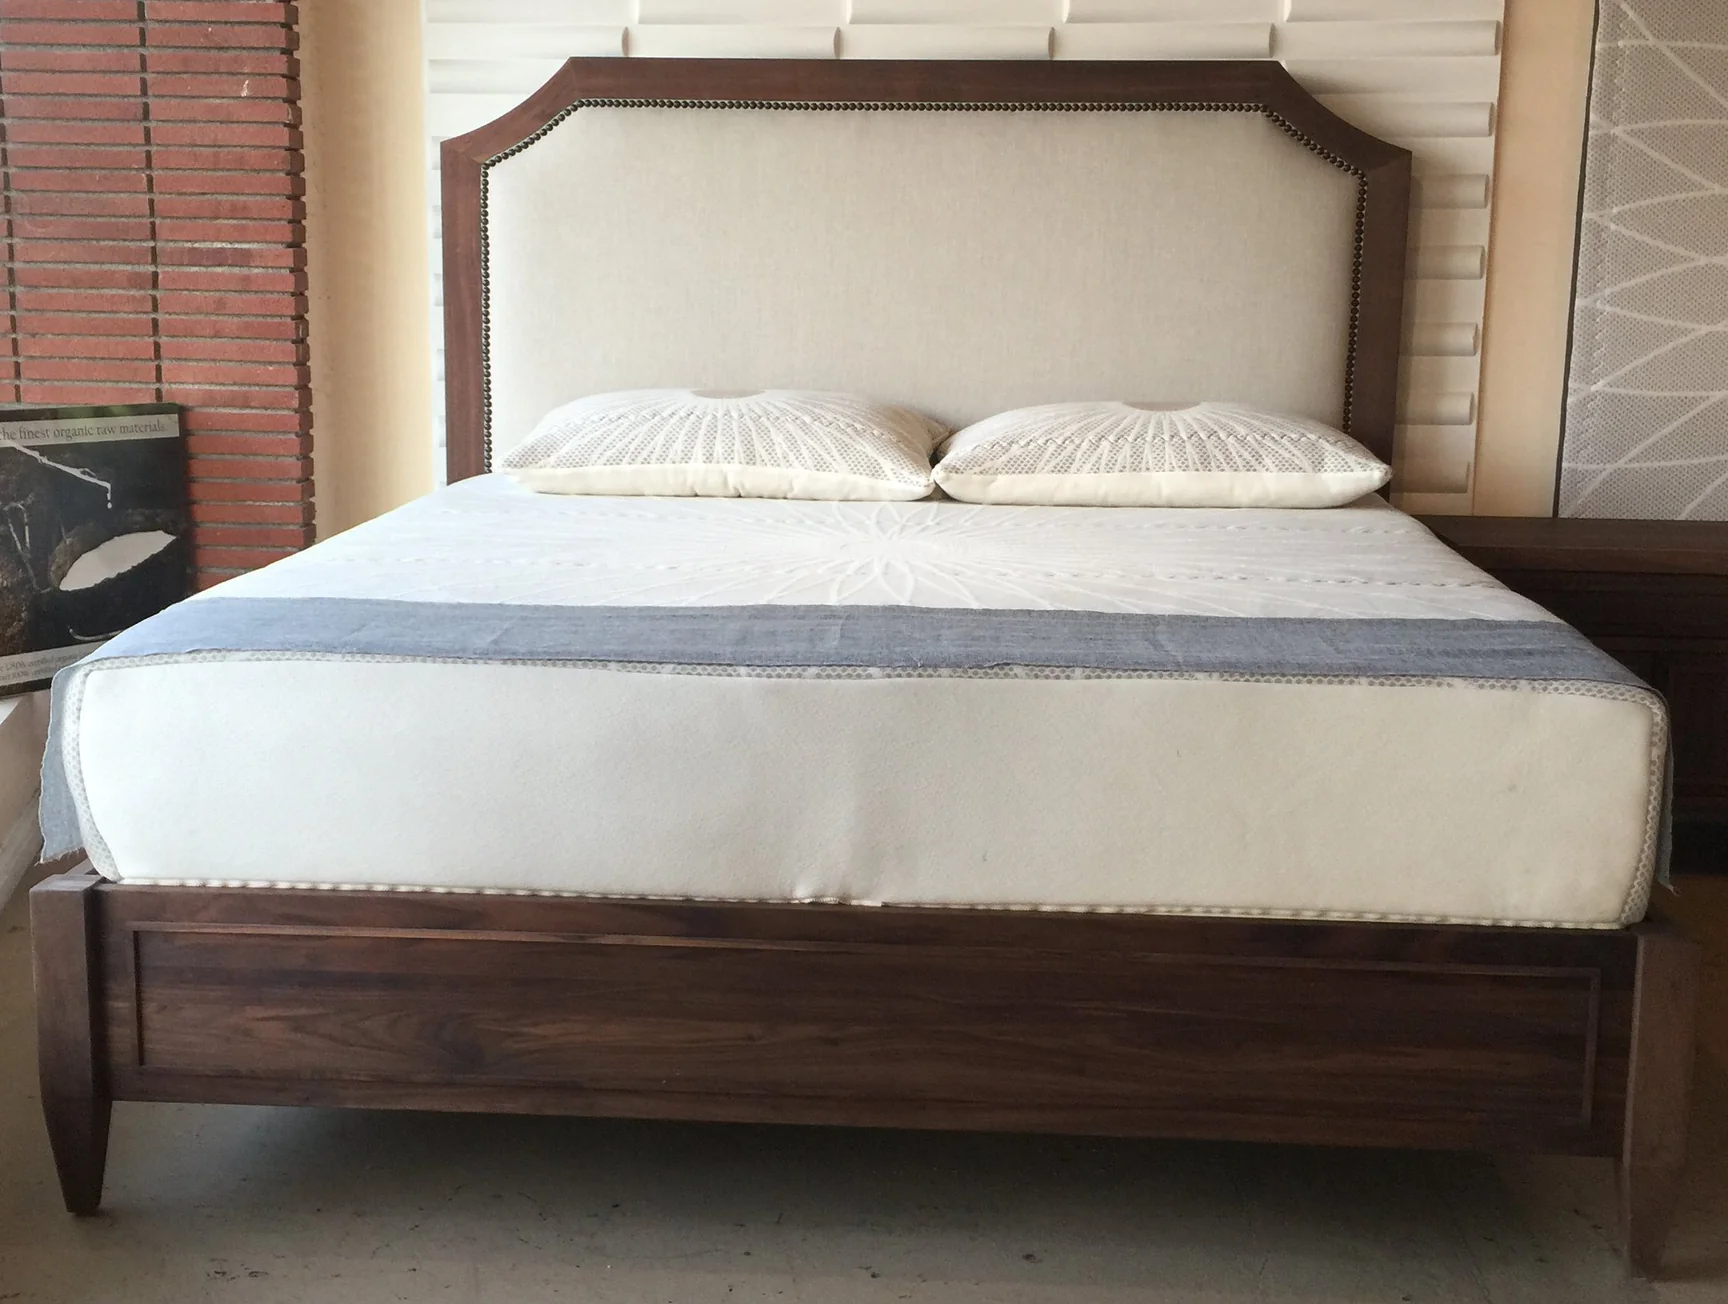 solid wood non toxic bed from green cradle